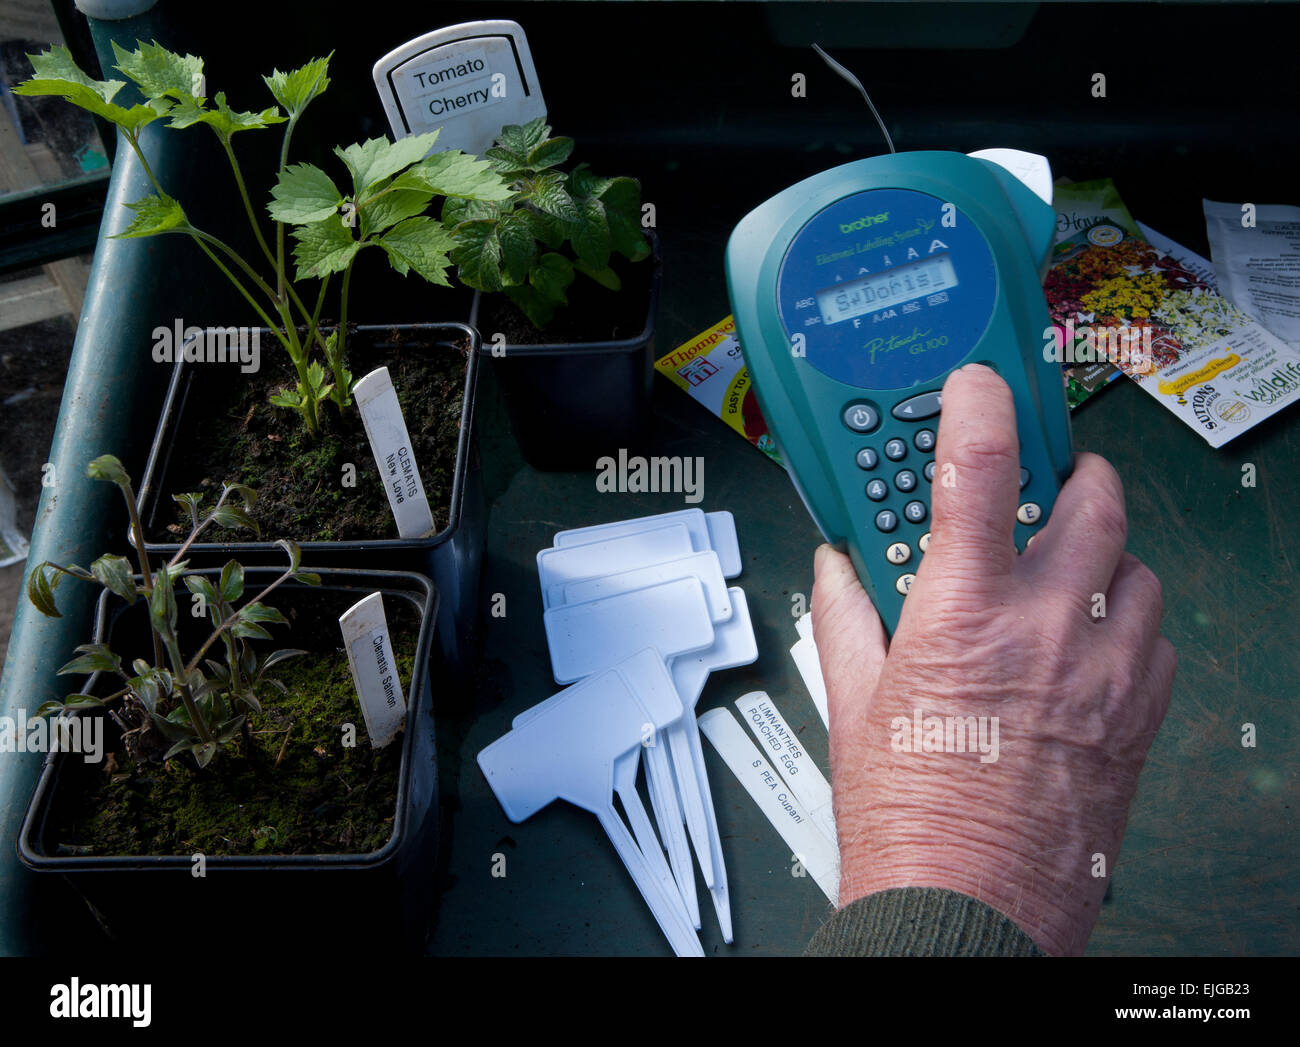 Printing labels for garden plants, using a Brother hand printer in a greenhouse. On the bench in a potting tray. Stock Photo